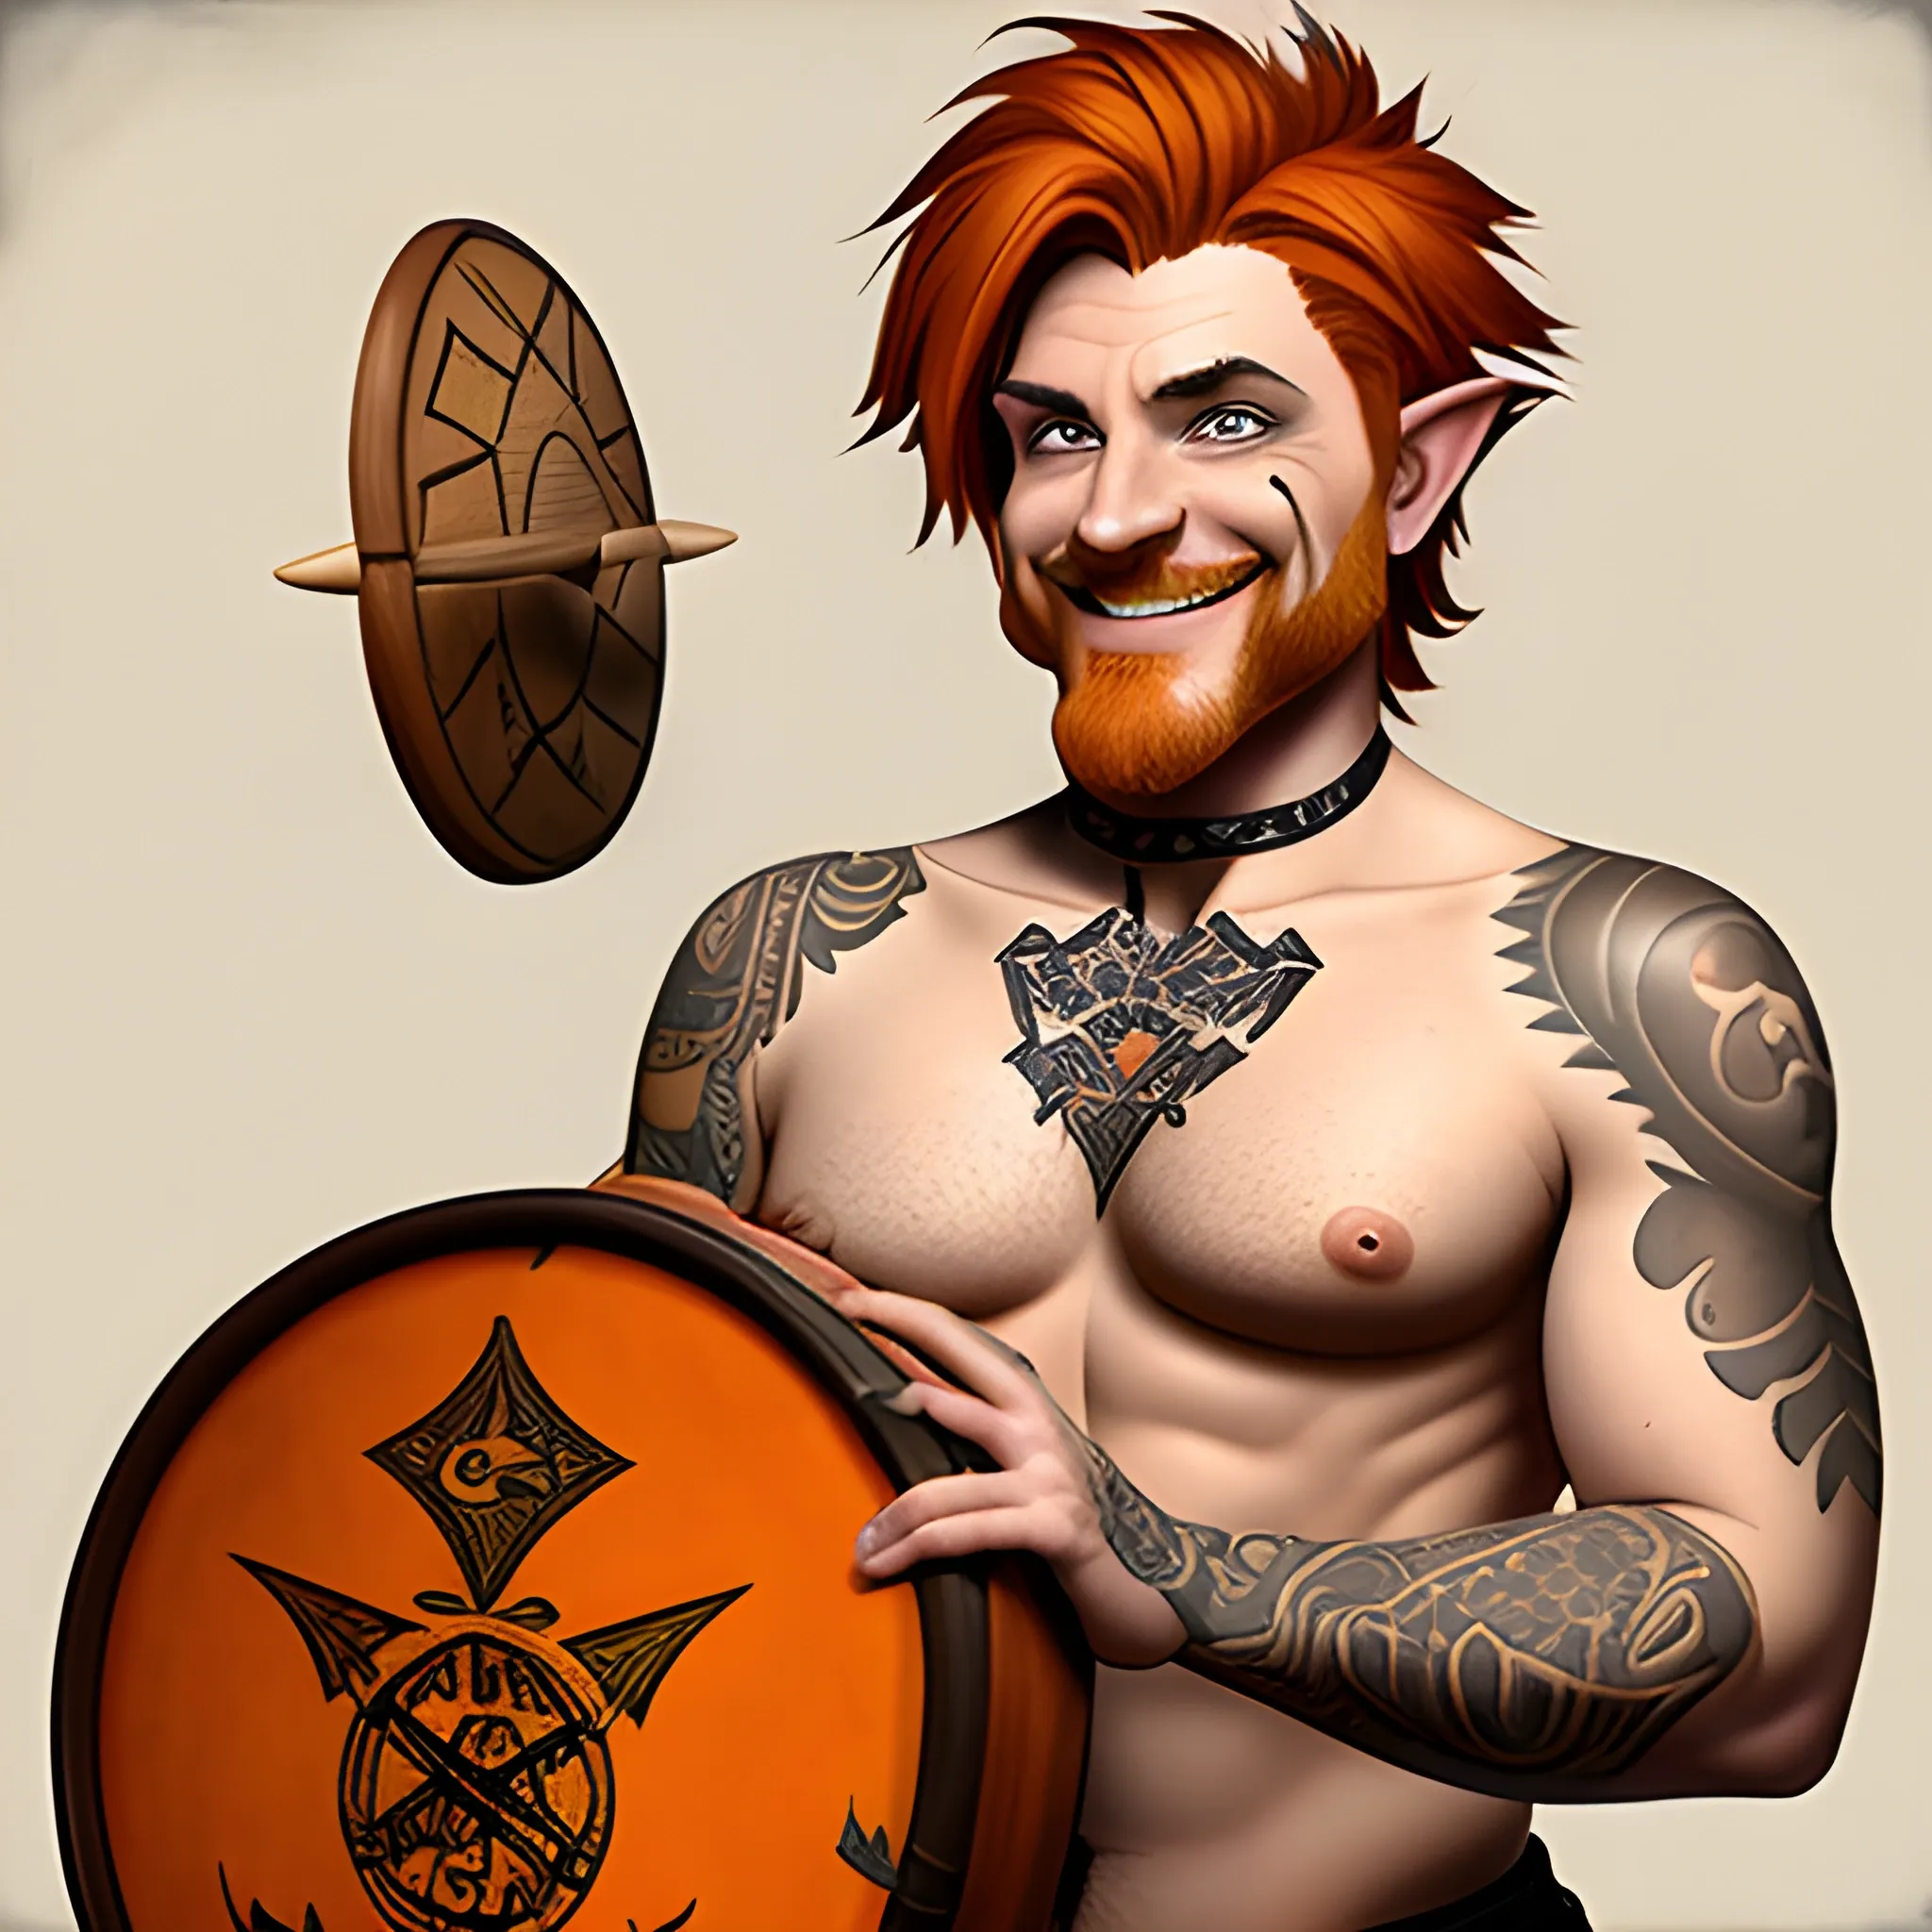 DnD male short haired halfling dark orange ginger with an goatee tatoos symbolizing a map on the chest , smiling with a mugshot expression and playing a small drum 